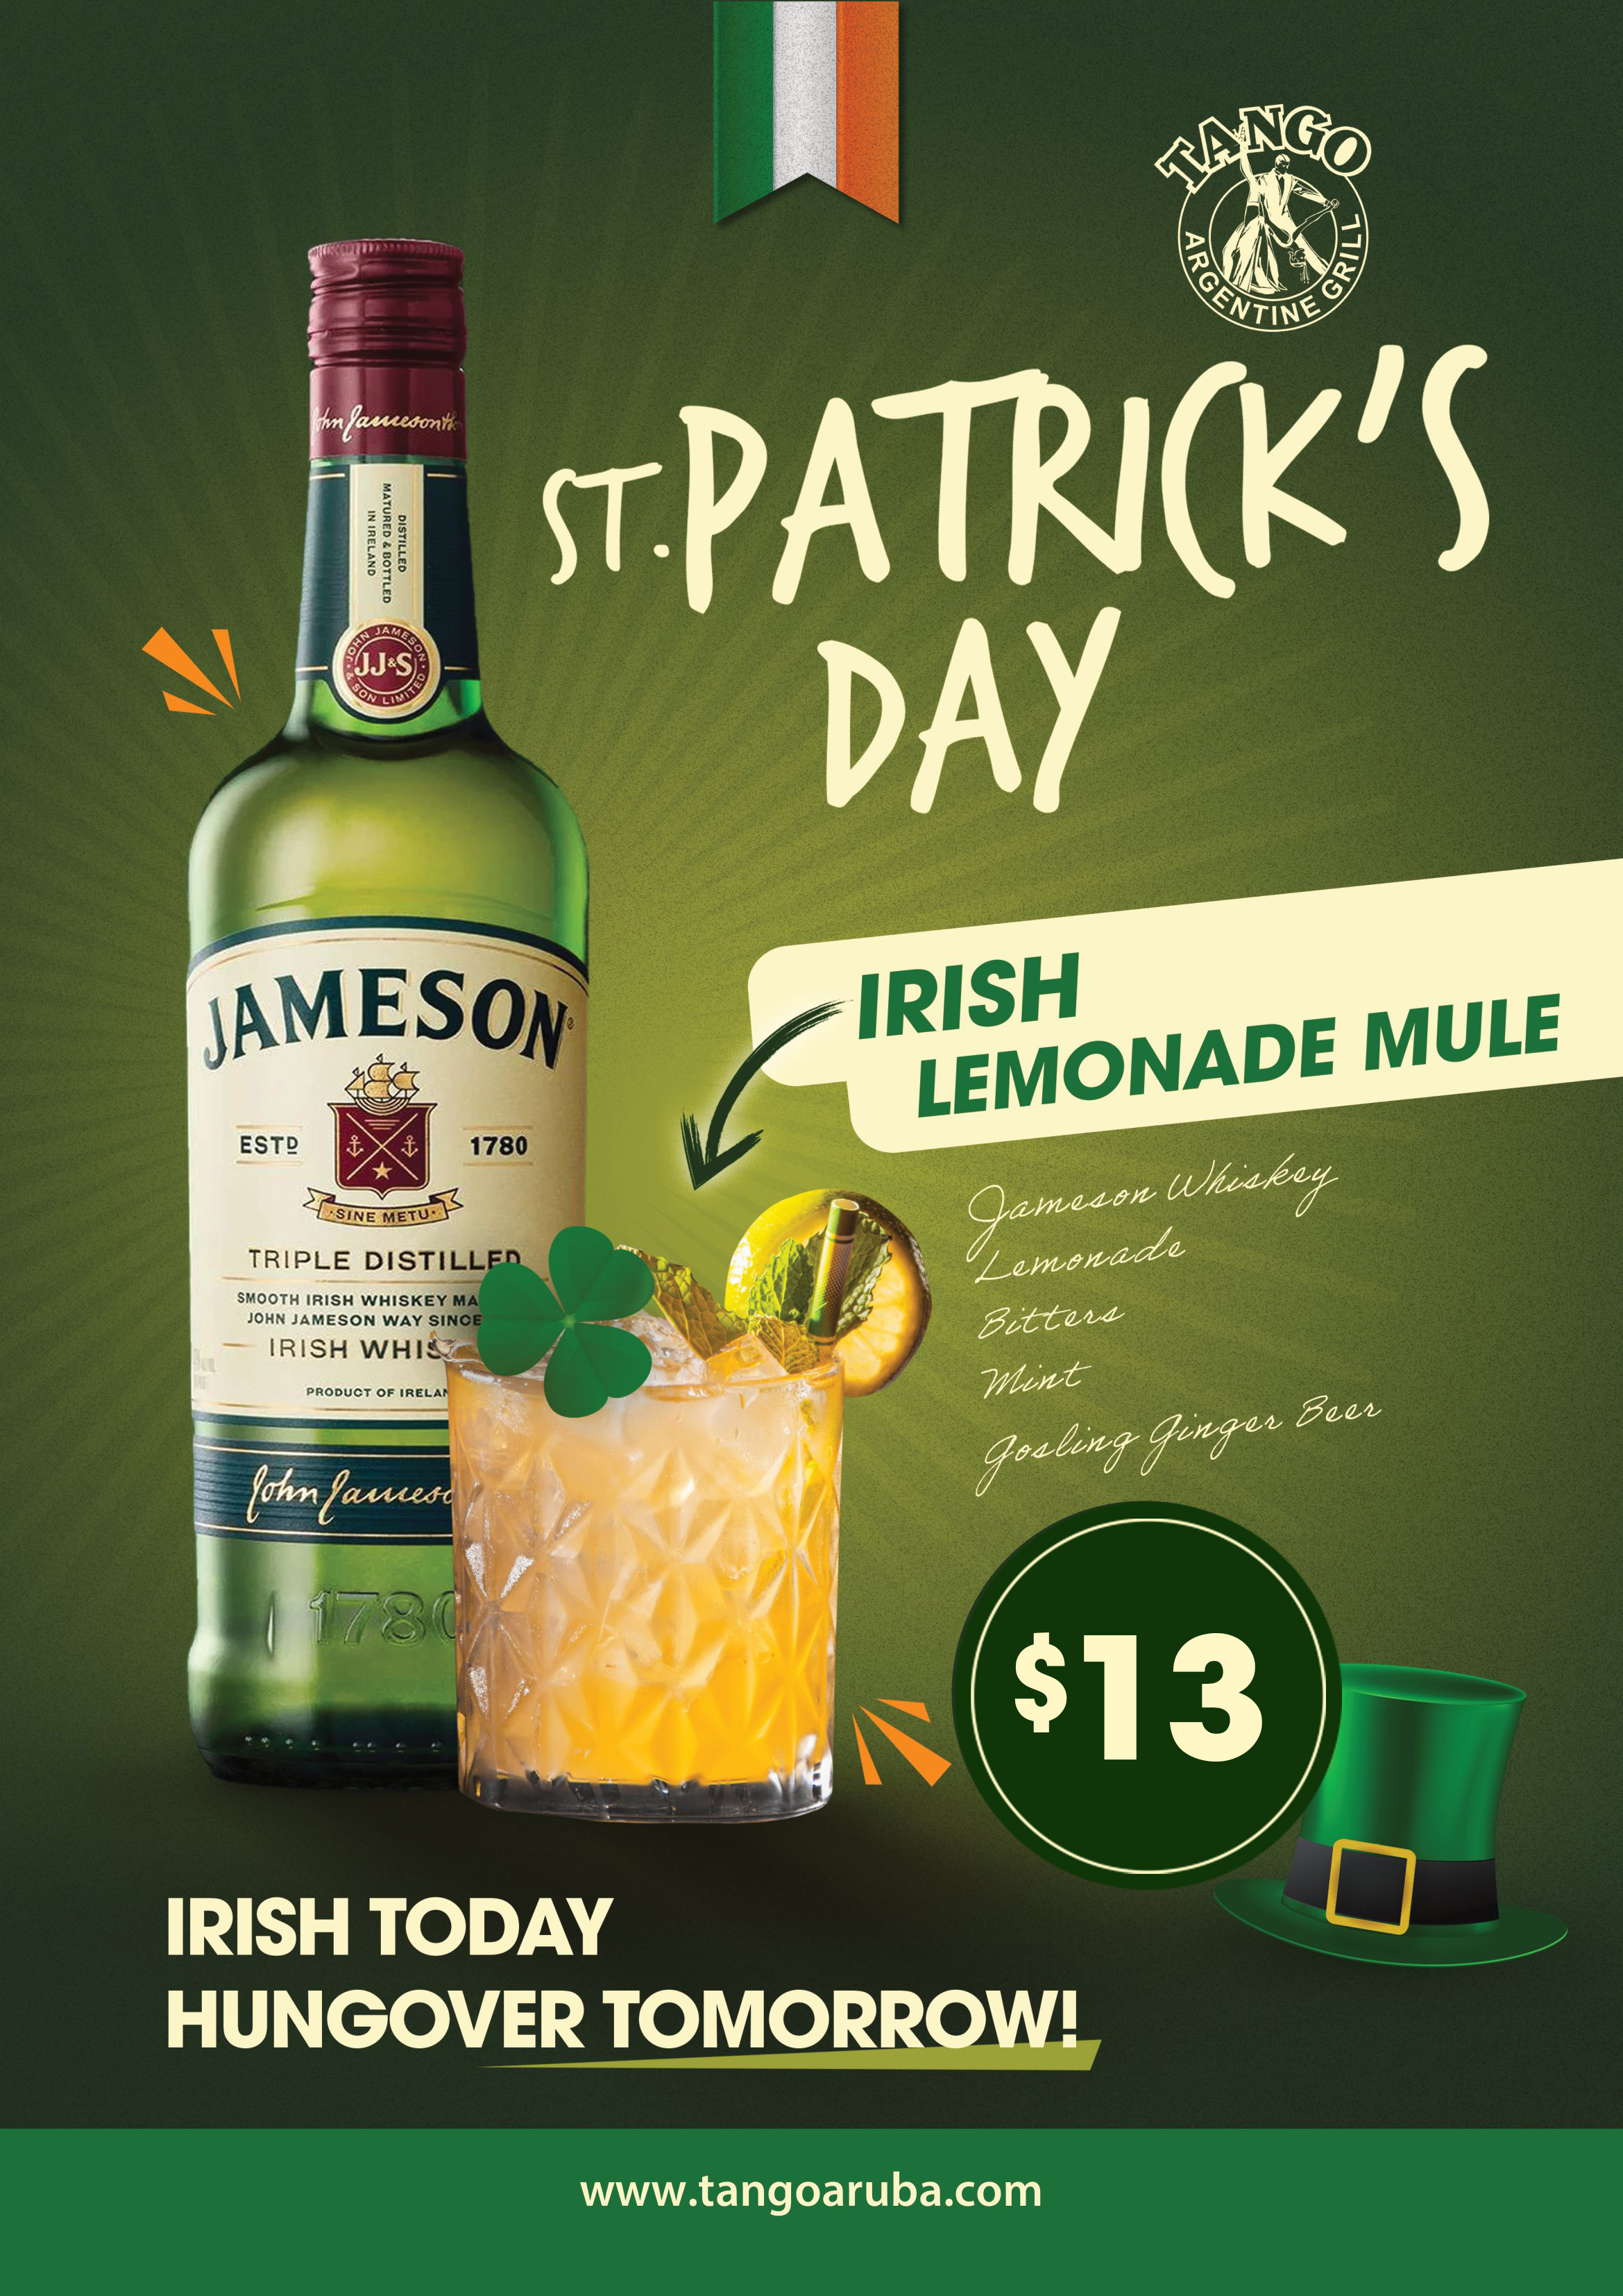 Are you ready to celebrate St. Patrick's Day in style? Come to Tango Argentine Grill and enjoy our festive atmosphere, delicious food, and special cocktails, including the refreshing Irish Lemonade Mule.